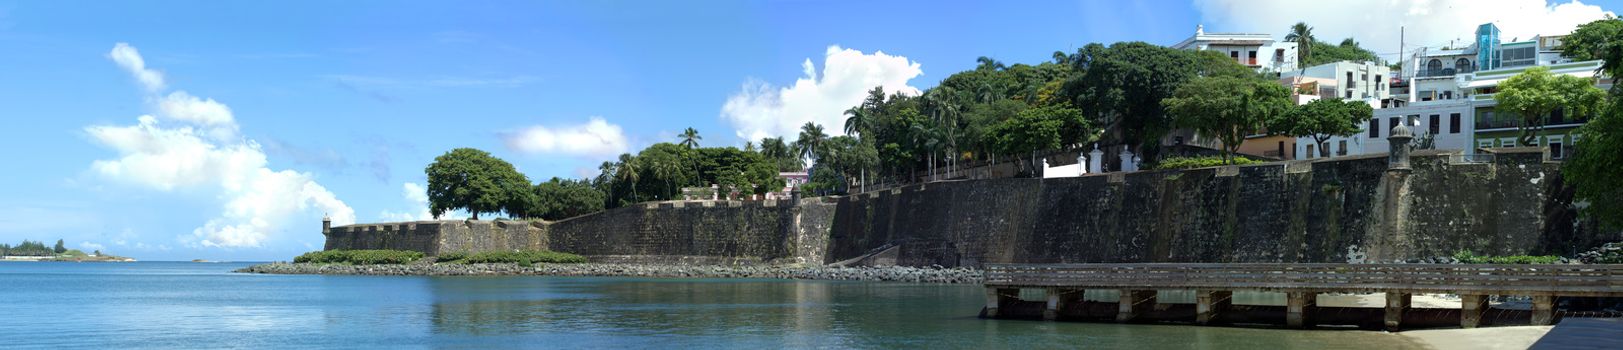 The city boundary and old decaying wall of El Morro fort located in Old San Juan Puerto Rico.